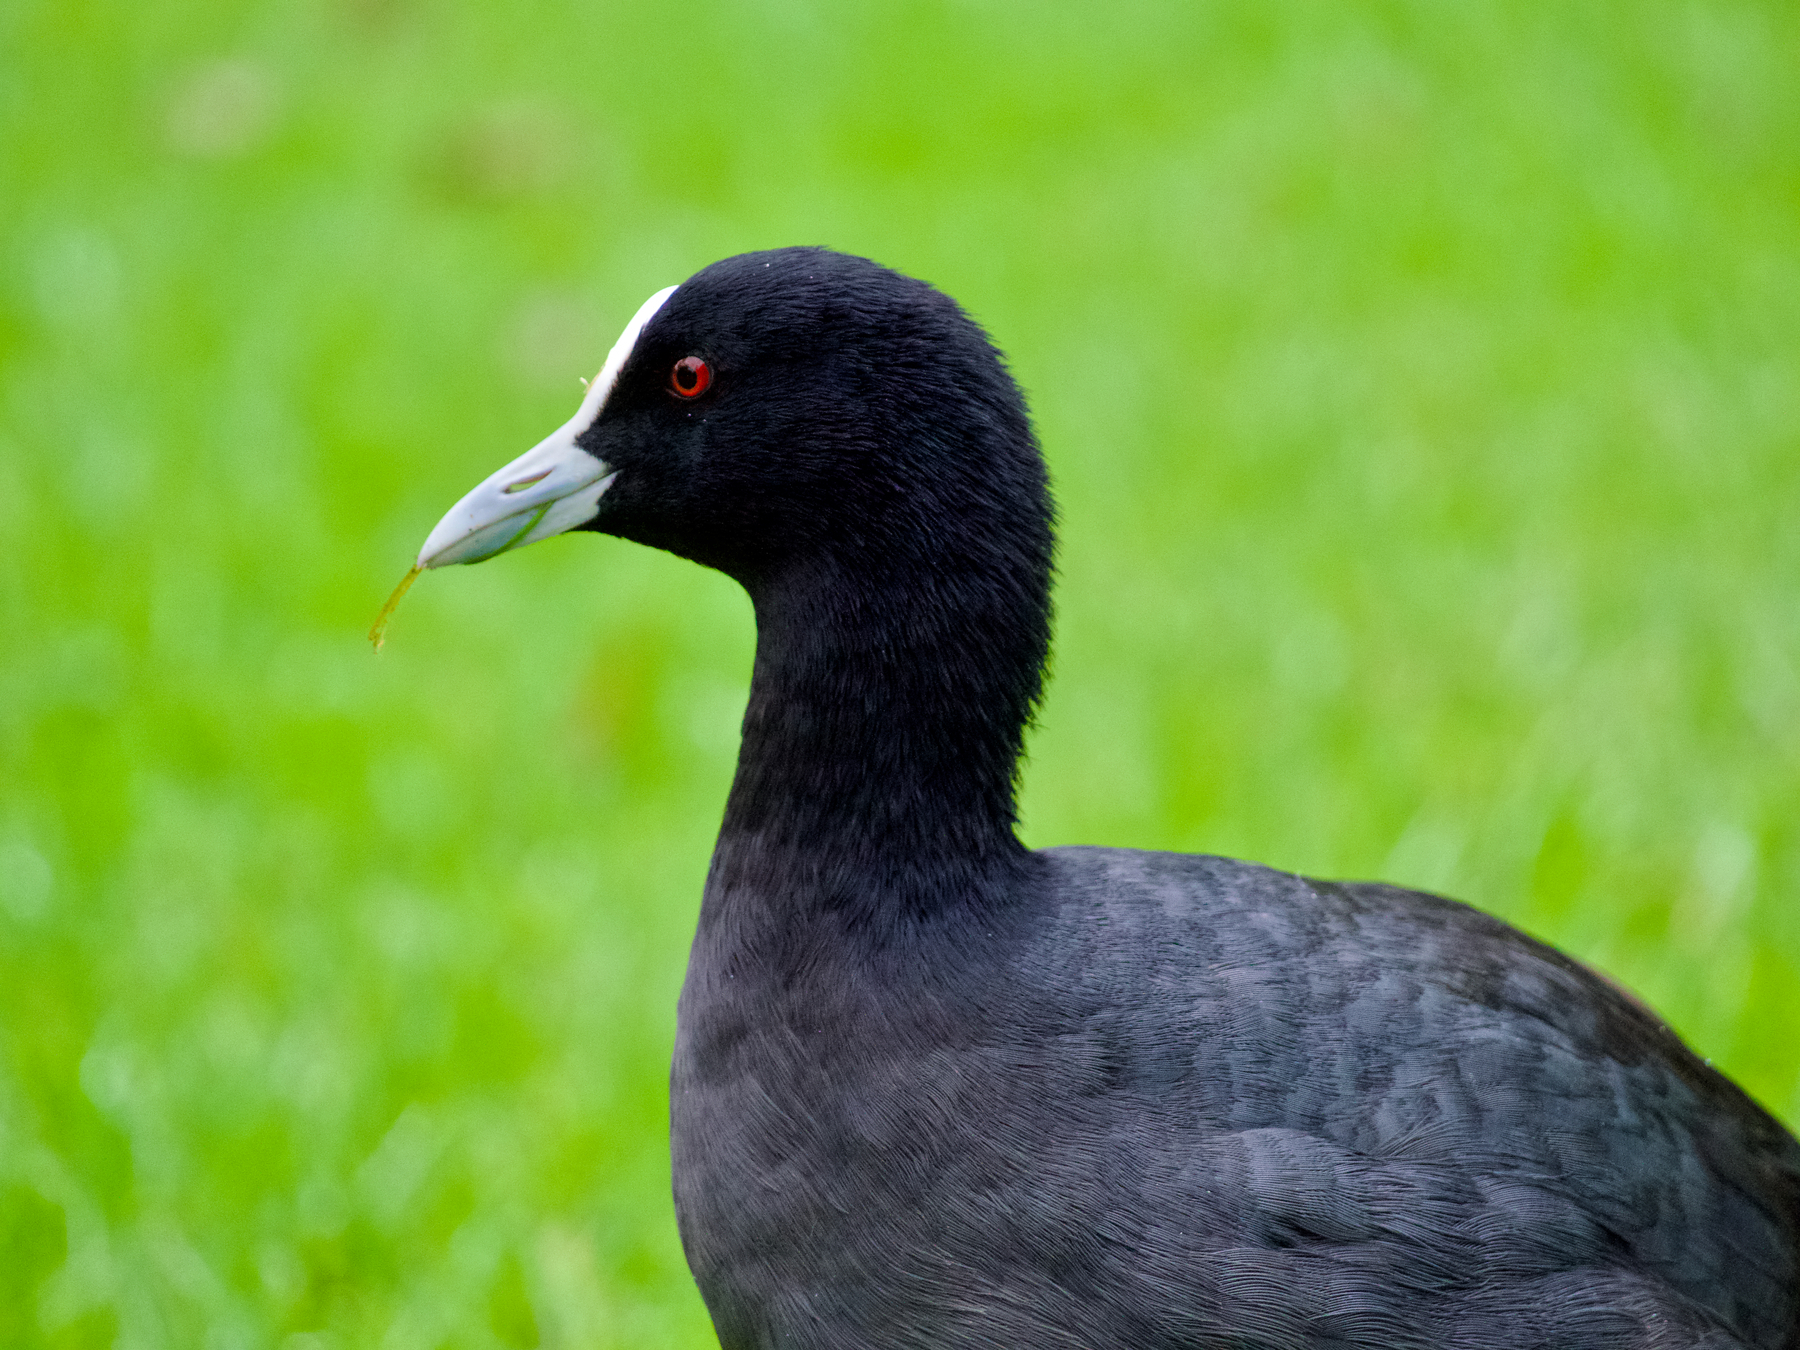 A close-up of a coot staring at the camera, while holding a blade of grass in its beak.